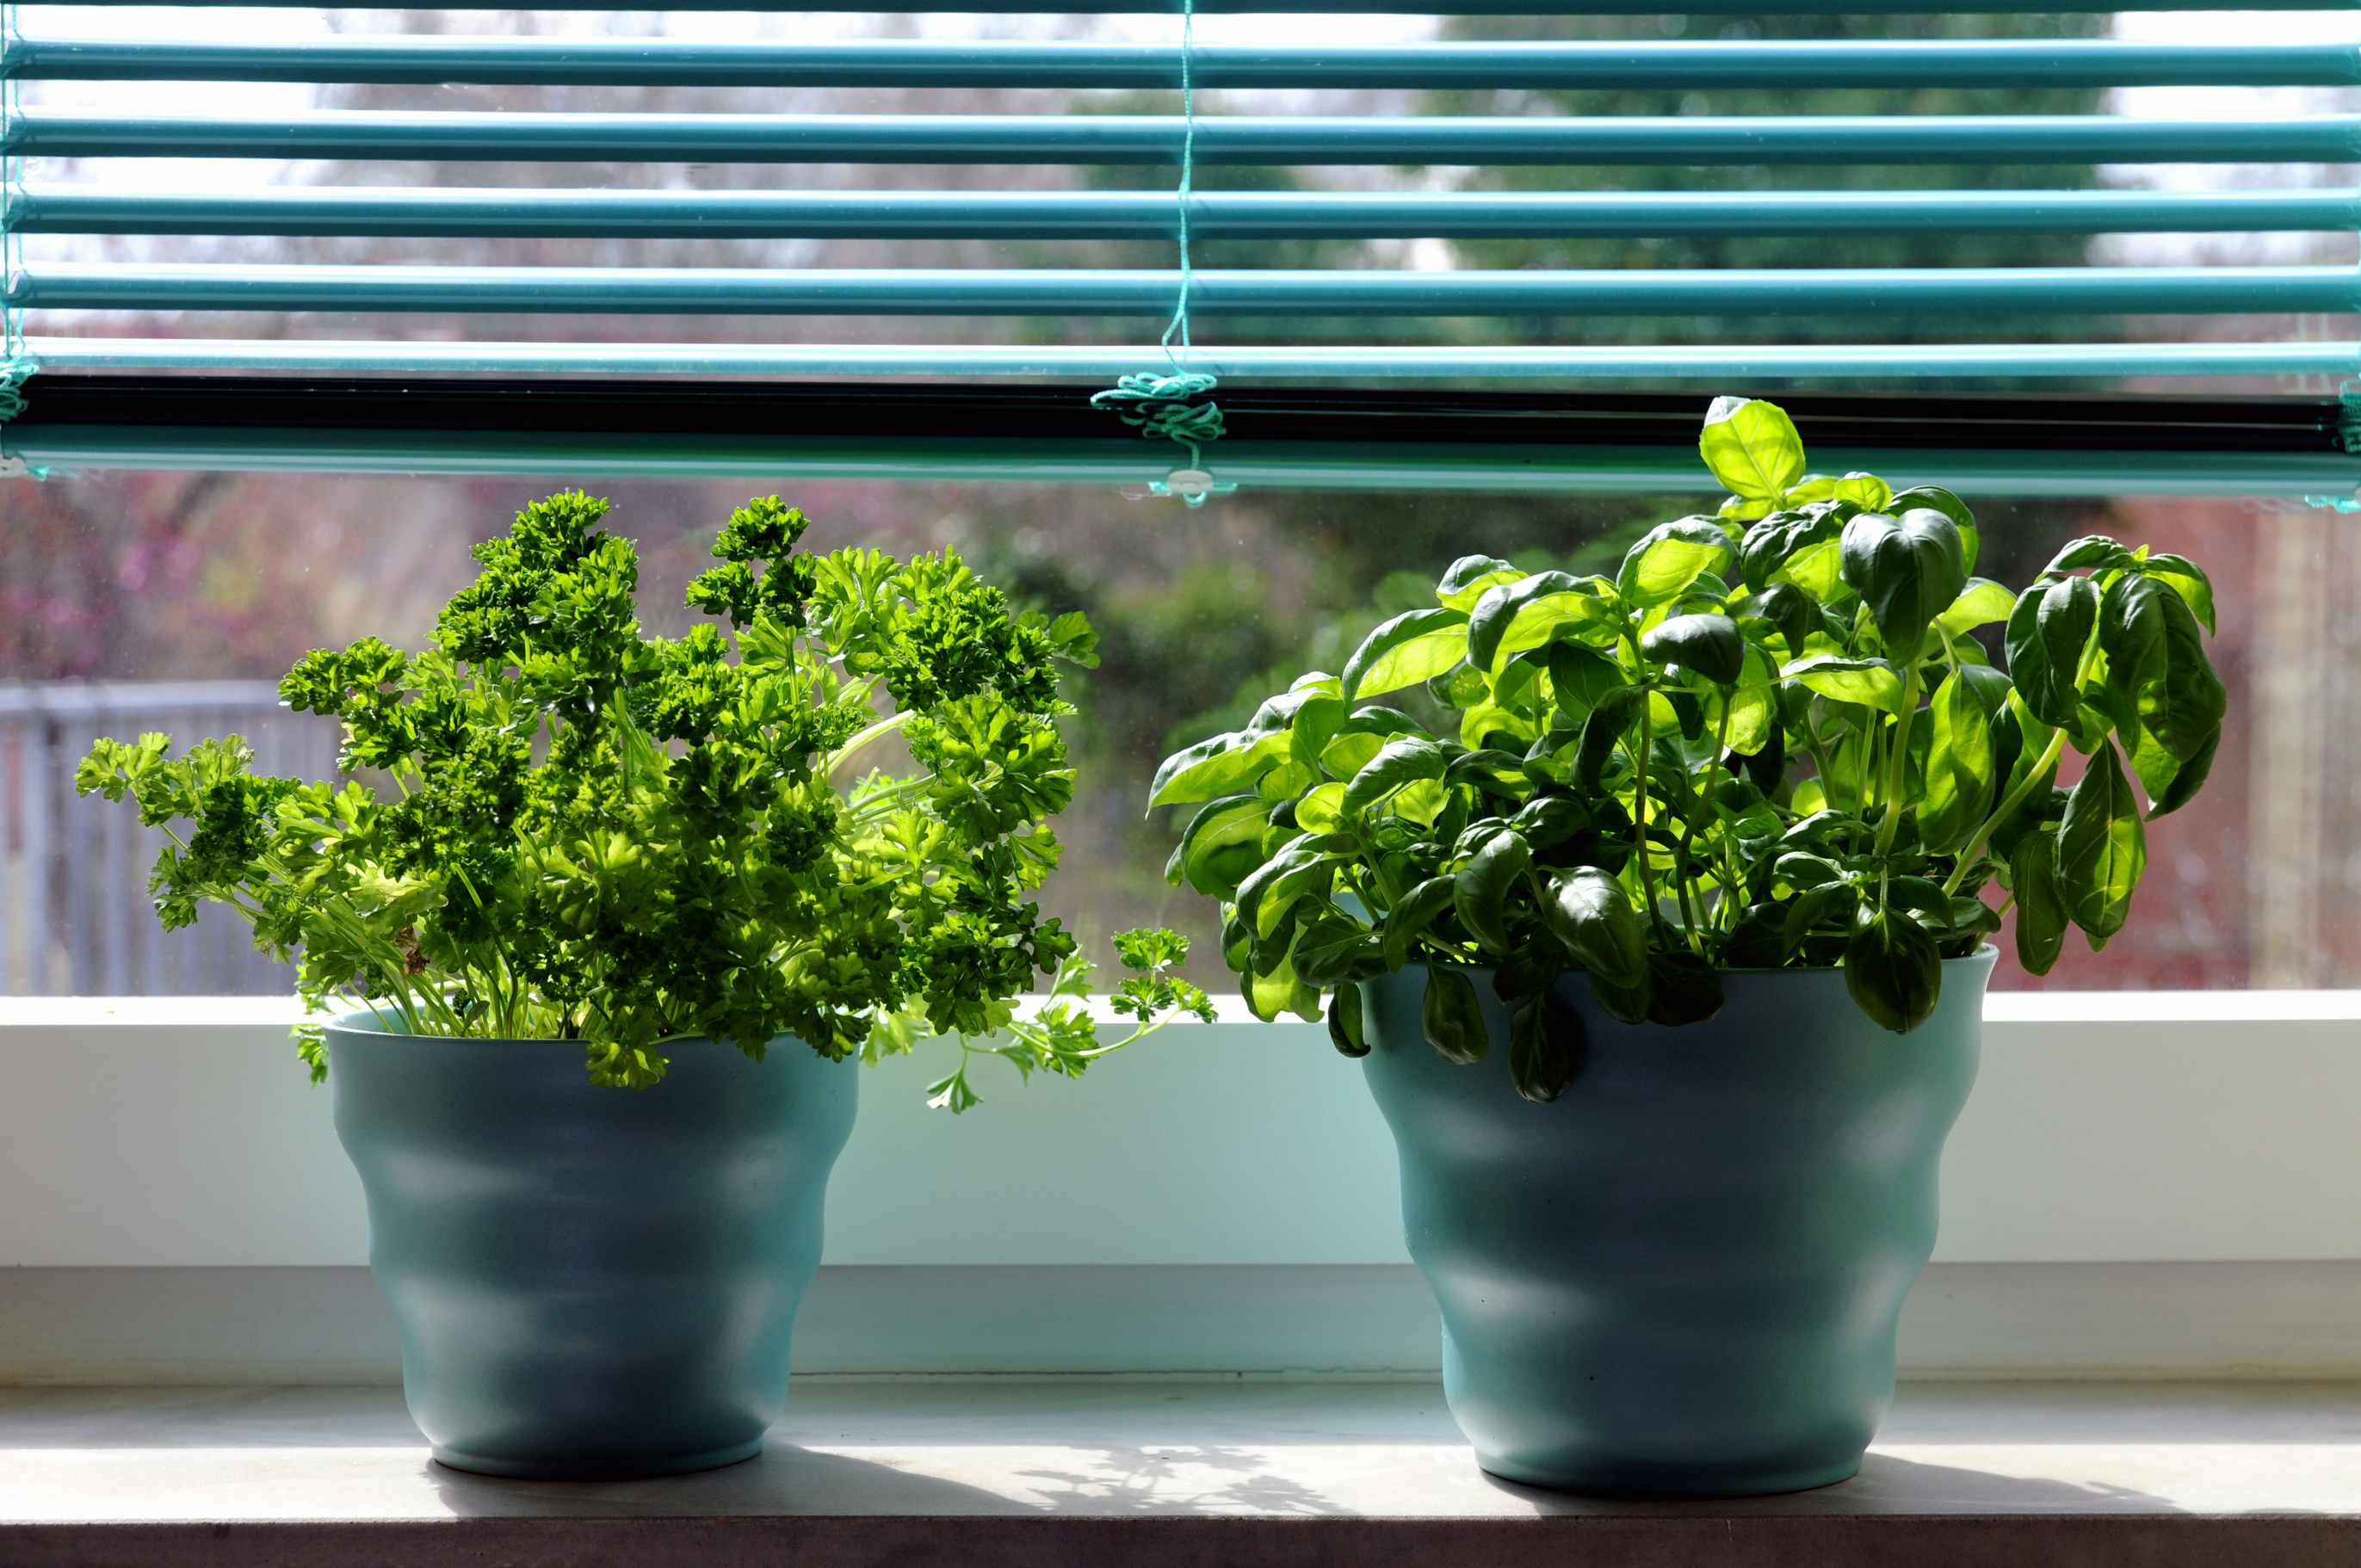 Basil and Parsley plants sitting on a windowsill with bright sun light